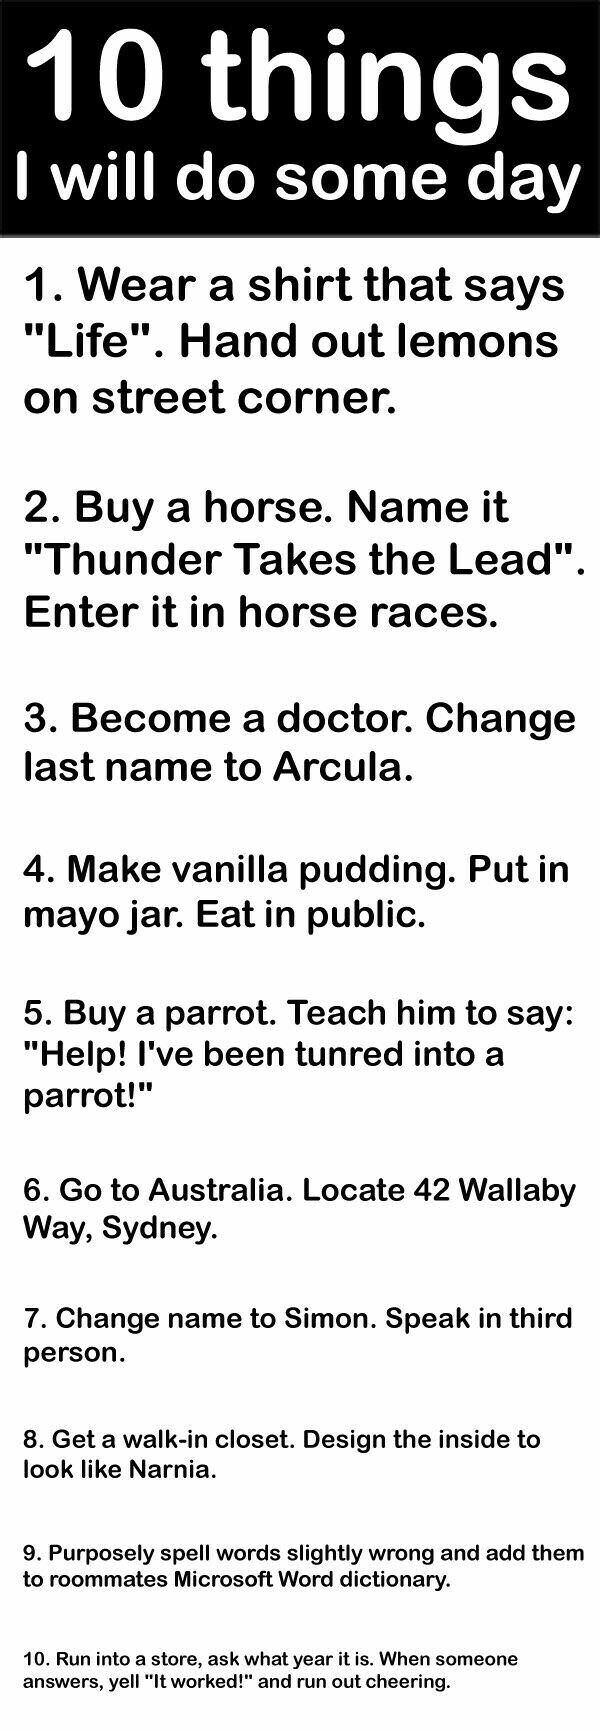 10 Funny Things to Do Some Day